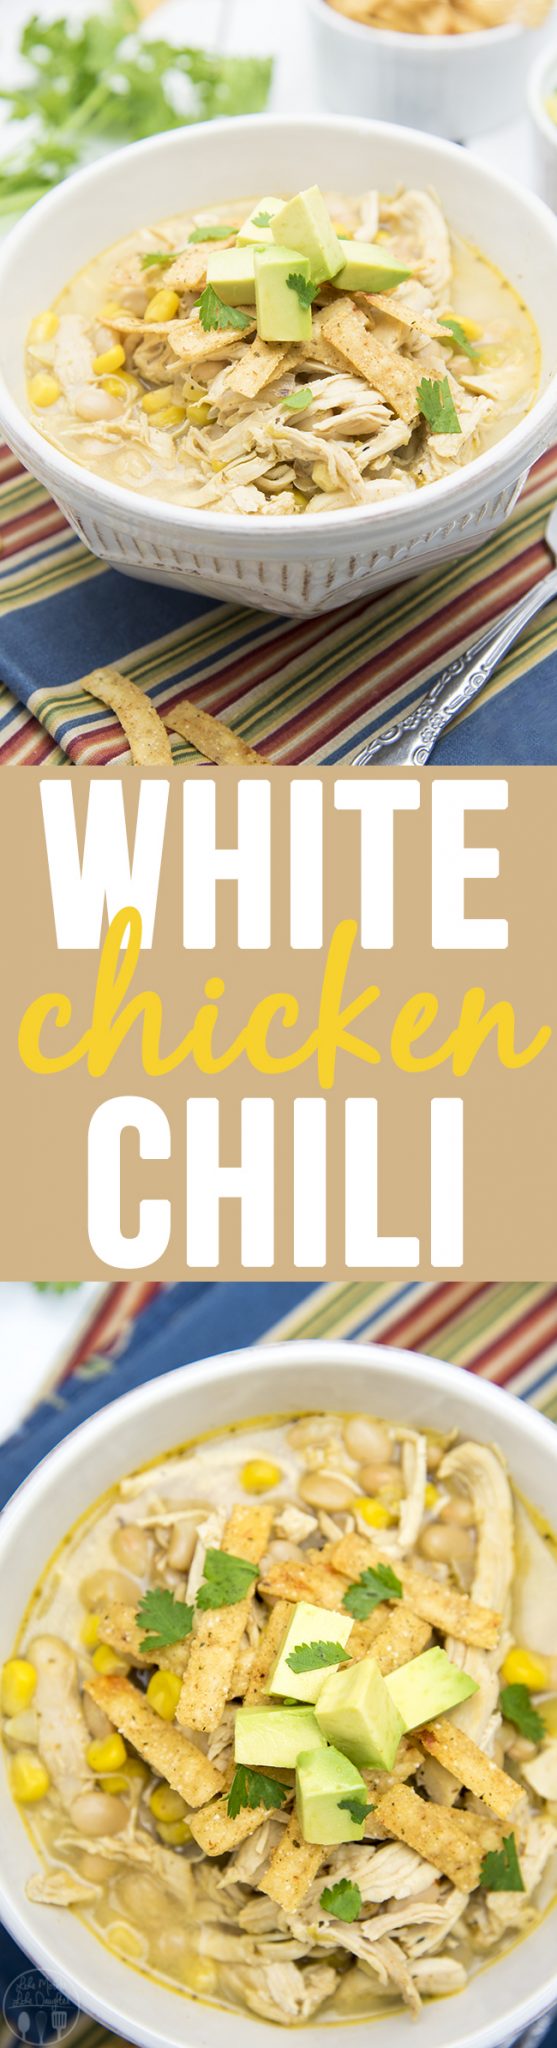 White chicken chili collage with text overlay that reads white chicken chili.